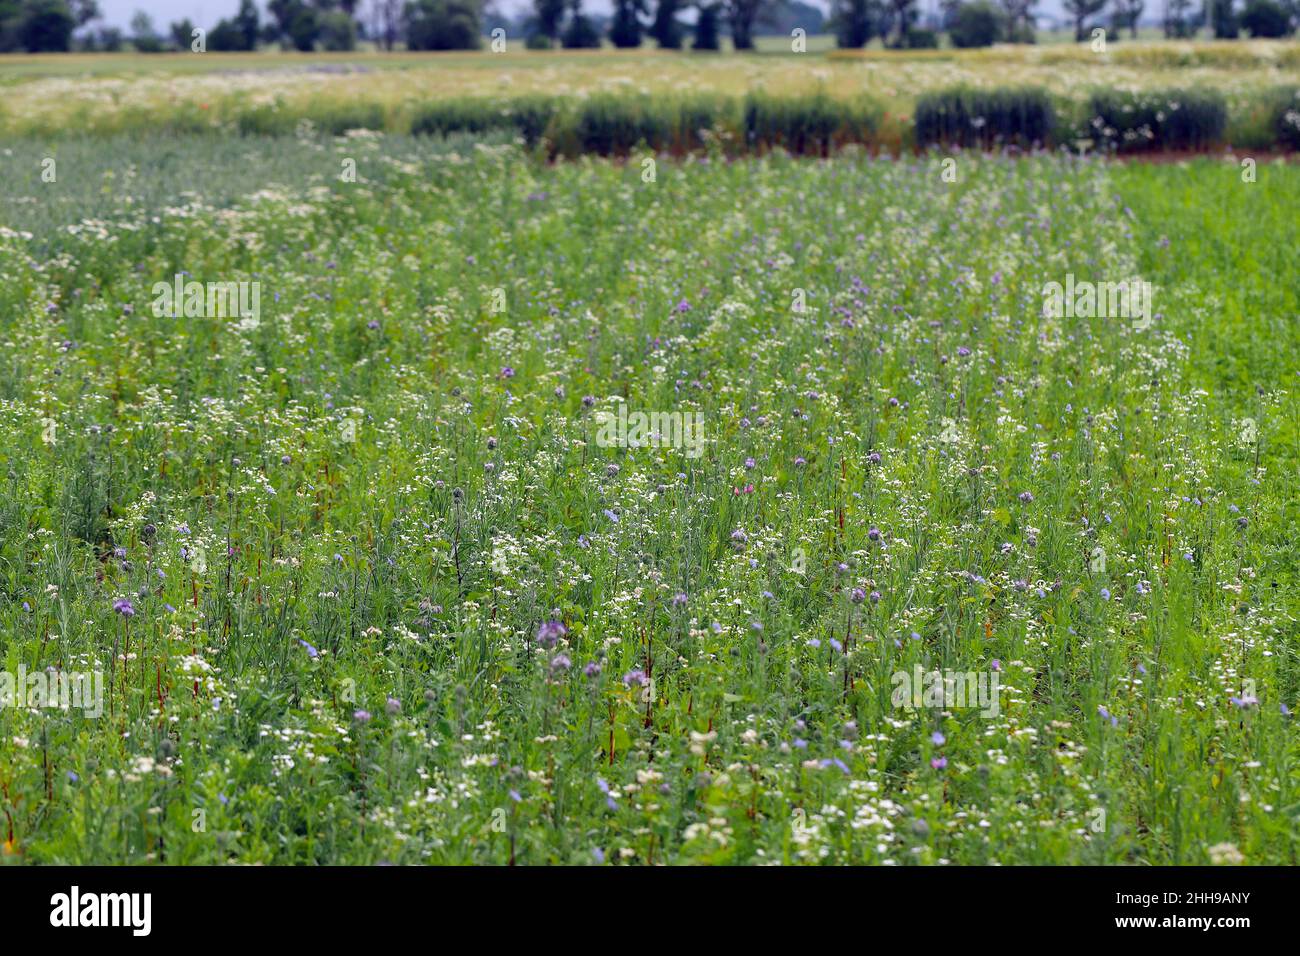 Flower meadow sown between crops in an agricultural landscape. Stock Photo